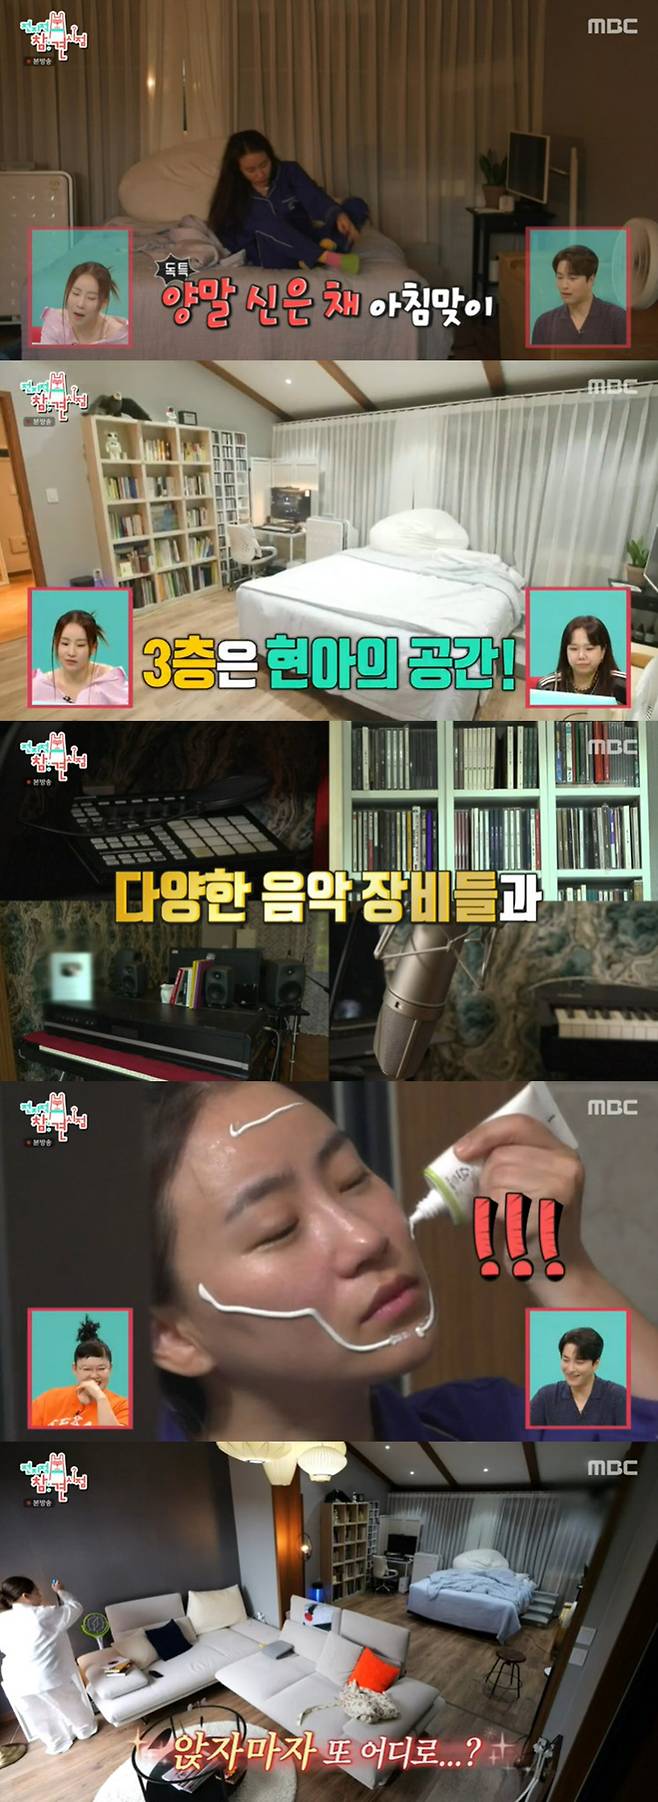 Point of Omniscient Interfere Jo Hyun Ah revealed his home in Namyangju, which he called up to 5000 flat theory.On the 12th MBC entertainment program Point of Omniscient Interferee, the daily life of singer Jo Hyun Ah was revealed.Jo Hyun Ahs house was known as a house that was large enough to have a 5000 flat theory. Jo Hyun Ah opened his eyes in a wide bed. In the third floor, the second floor was used by the family and the third floor was Jo Hyun Ahs space.Jo Hyun Ahs bedroom had a sofa, and on one side of the living room was Jo Hyun Ahs studio and Jo Hyun Ahs Thursday night studio.Jo Hyun Ahs 10-year-old manager said, Jo Hyun Ah likes to meet people, and he is a super strong E, but he is a homebody. Ive never seen him as a homebody, and I want to look at him like that.After a high-tension video call with his best friend Hyomin as soon as he opened his eyes, Jo Hyun Ah carefully washed his face. Yang said, I value my skin very much. Jo Hyun Ah said, I do not go to dermatology.Jo Hyun Ahs skin care was not done, as Jo Hyun Ah applied a lot of sunscreen and plastered his face with sunscreen.Jo Hyun Ah changed into another pajamas, and Jo Hyun Ah took out a book from the refrigerator filled with Xero drinks. Jo Hyun Ah said, I do not like to chew.I am in the best condition when I am on an empty stomach.  I hate chicken breasts while exercising. I do not eat such things, so I keep eating Xero drinks. I drink about 10 bottles in Haru Jo Hyun Ah, who was busy moving back and forth while reading a book. Jo Hyun Ah turned into a piano and played the piano. Jo Hyun Ah wrote a song to overcome the breakup. All experience is property.Theres a lot of money, he said.Jo Hyun Ahs homebody Haru wasnt finished. Jo Hyun Ah, dressed in an umbrella and raincoat, got out and went to the backyard. Jo Hyun Ahs backyard was even equipped with space for golf practice.Jo Hyun Ah burned his passion with his umbrella, lunge, run away, and so on.Manager came to Jo Hyun Ahs house. Jo Hyun Ah and Manager decided to have a picnic. Manager said, I came out with the company at the end of last year and established a new agency.We are co-representatives, he said.The manager talked about his hair falling out as he got older, and Jo Hyun Ah suddenly showed tears.Jo Hyun Ah, who poured tears in the studio, said, I know everything about me. I have been working with you for over 10 years, trusting me, working with you, and honestly, it was really hard, but yesterday I had a surplus.